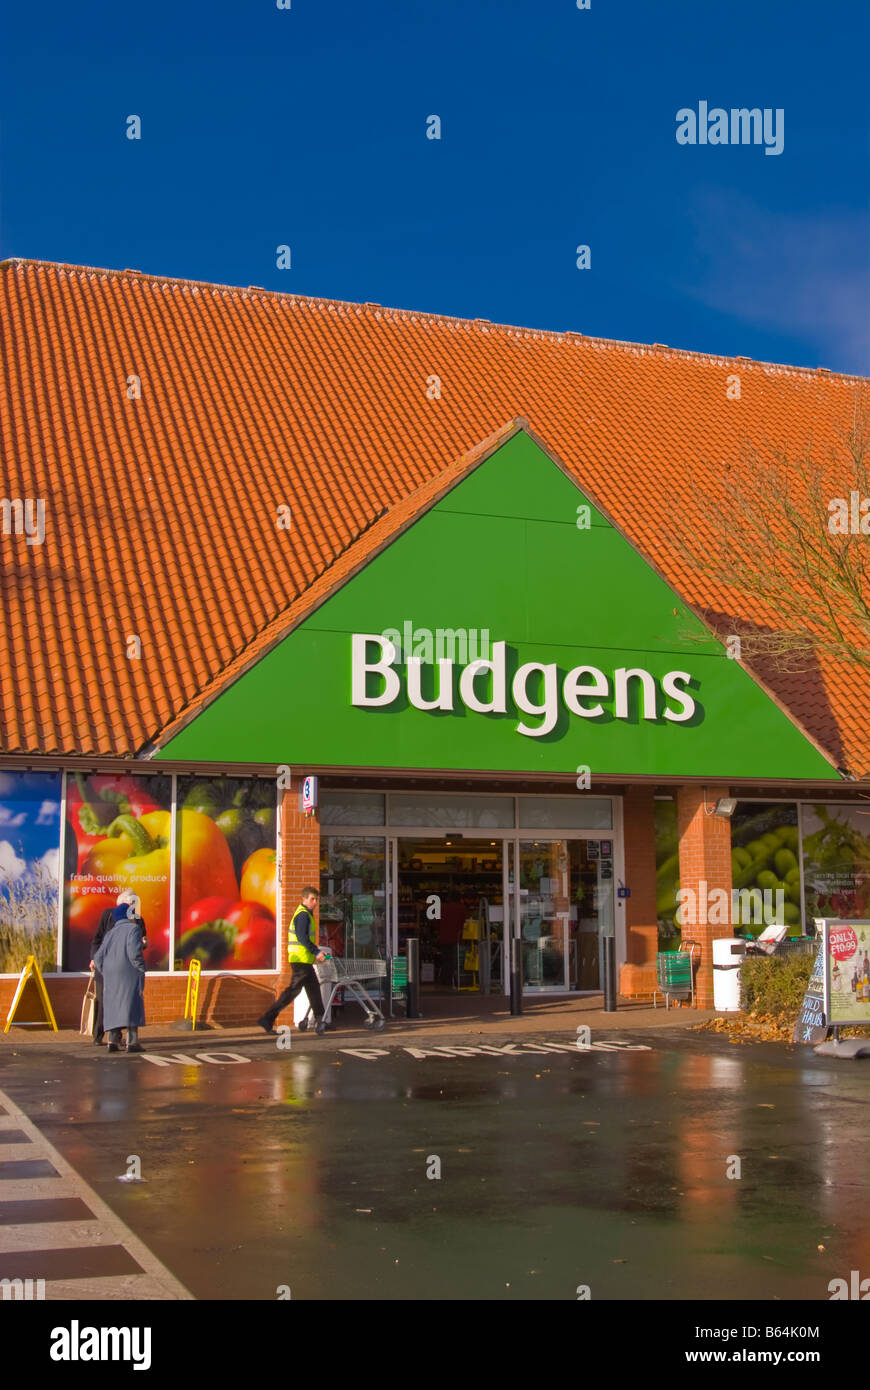 Budgens supermarket superstore shop store selling groceries etc. with customers outside in Harleston,Norfolk,Uk Stock Photo